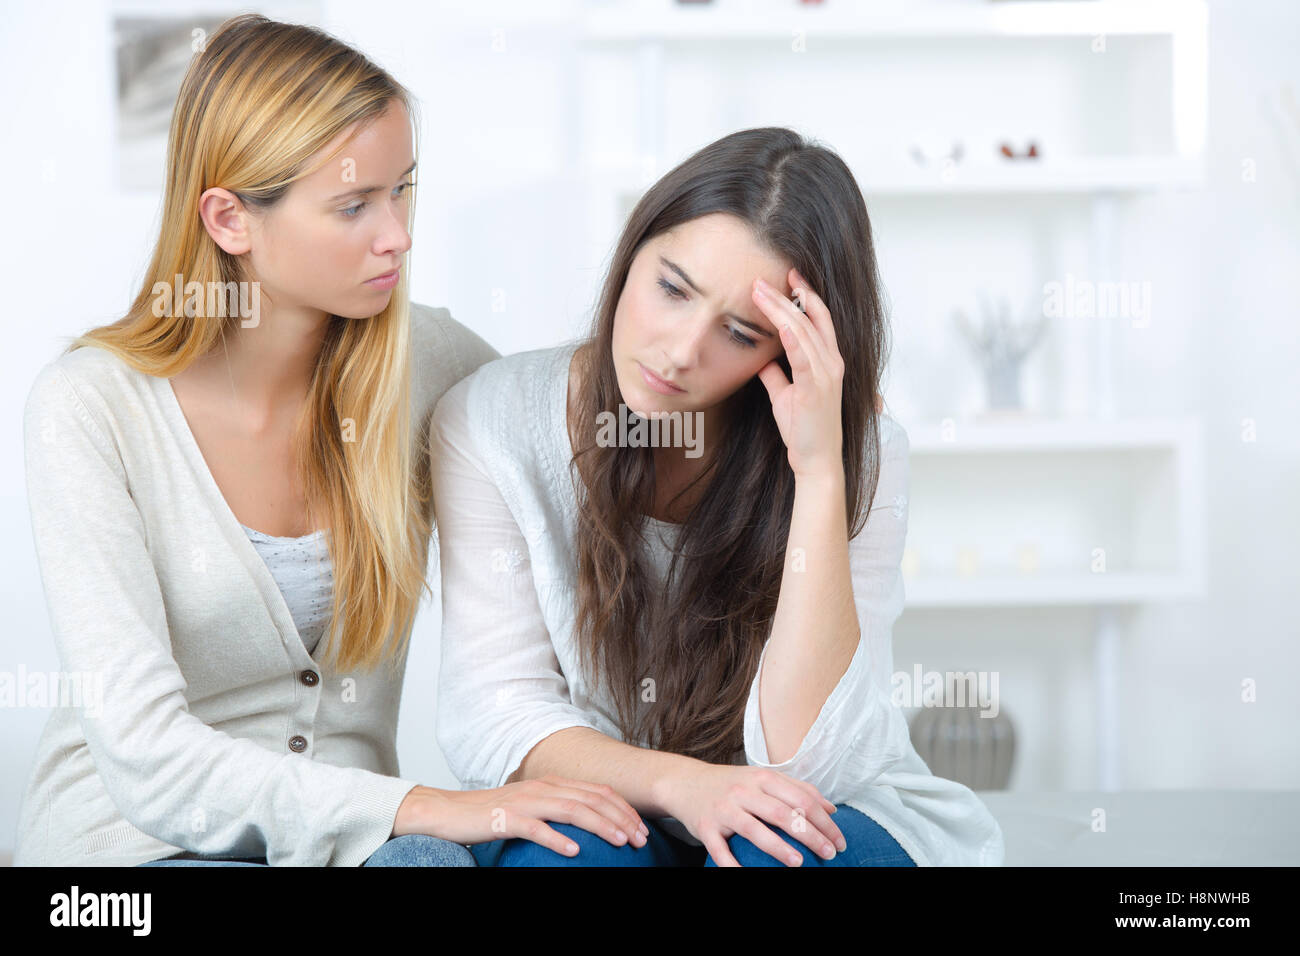 teen girl consoling her sad friend Stock Photo